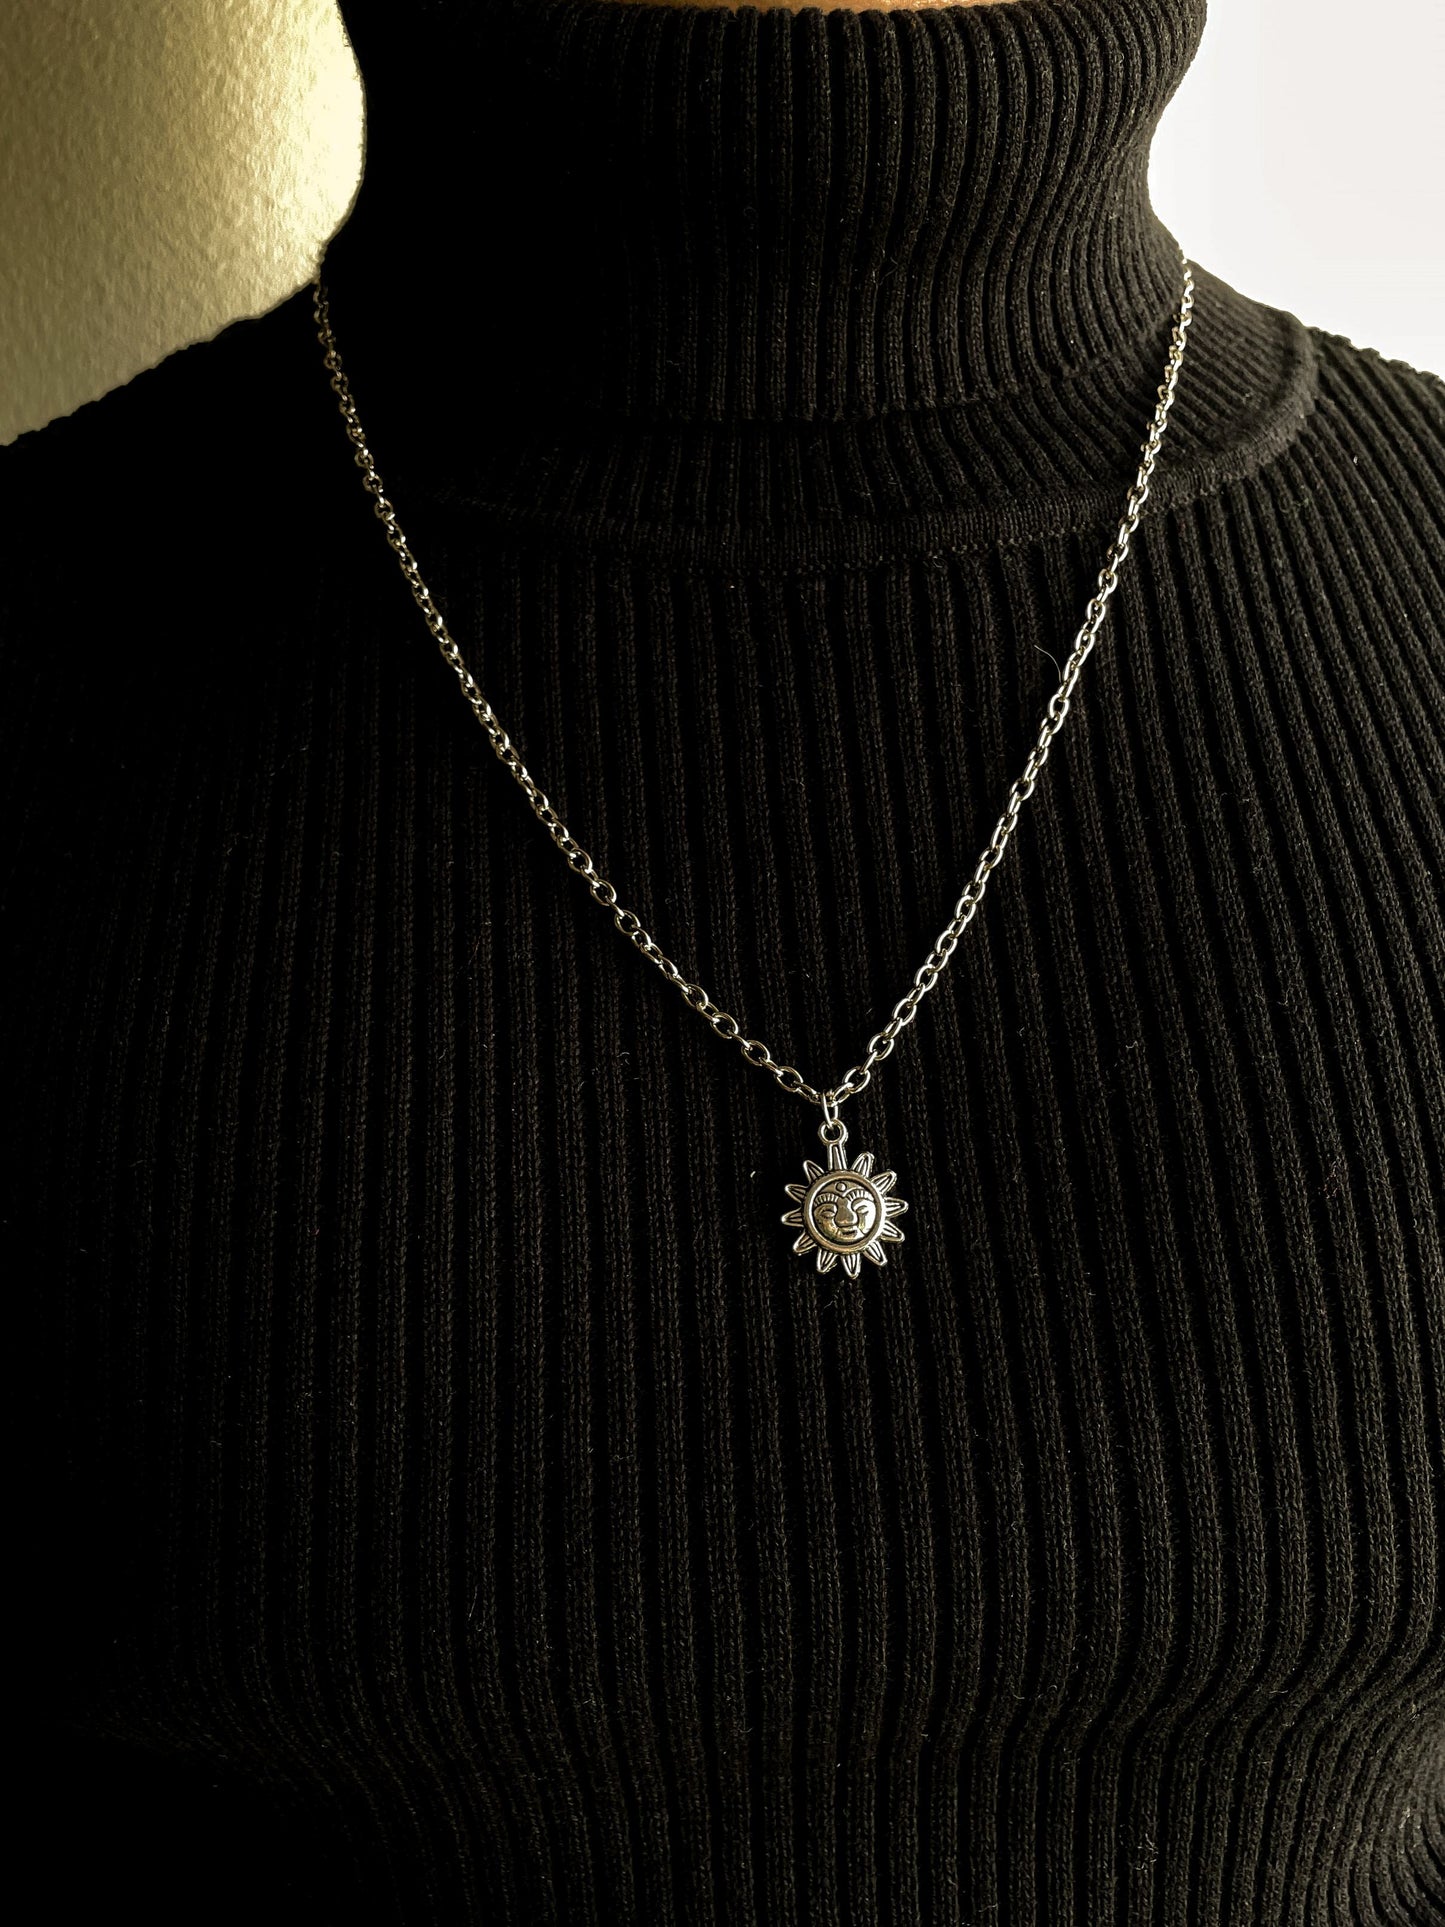 Vintage Sun Silver Pendant With Chain